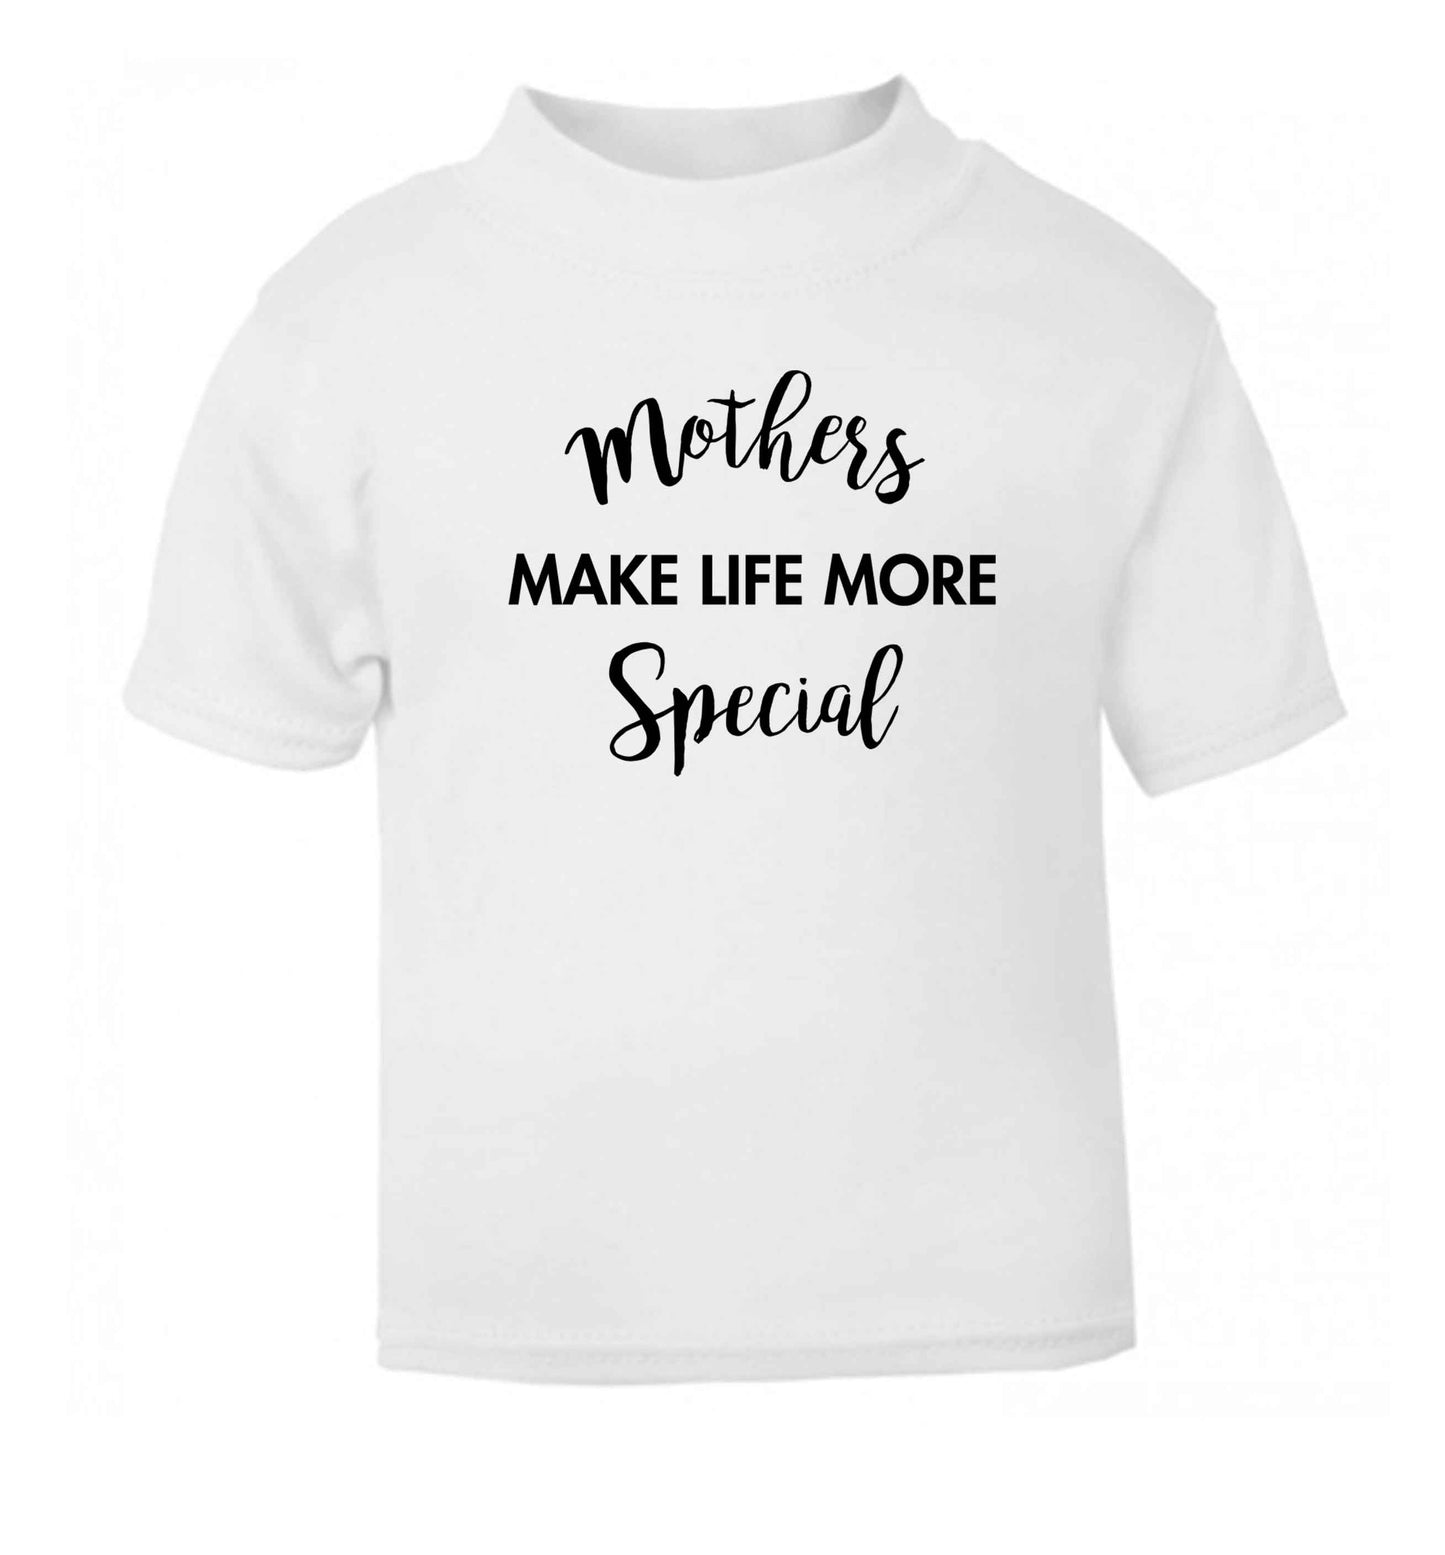 Mother's make life more special white baby toddler Tshirt 2 Years